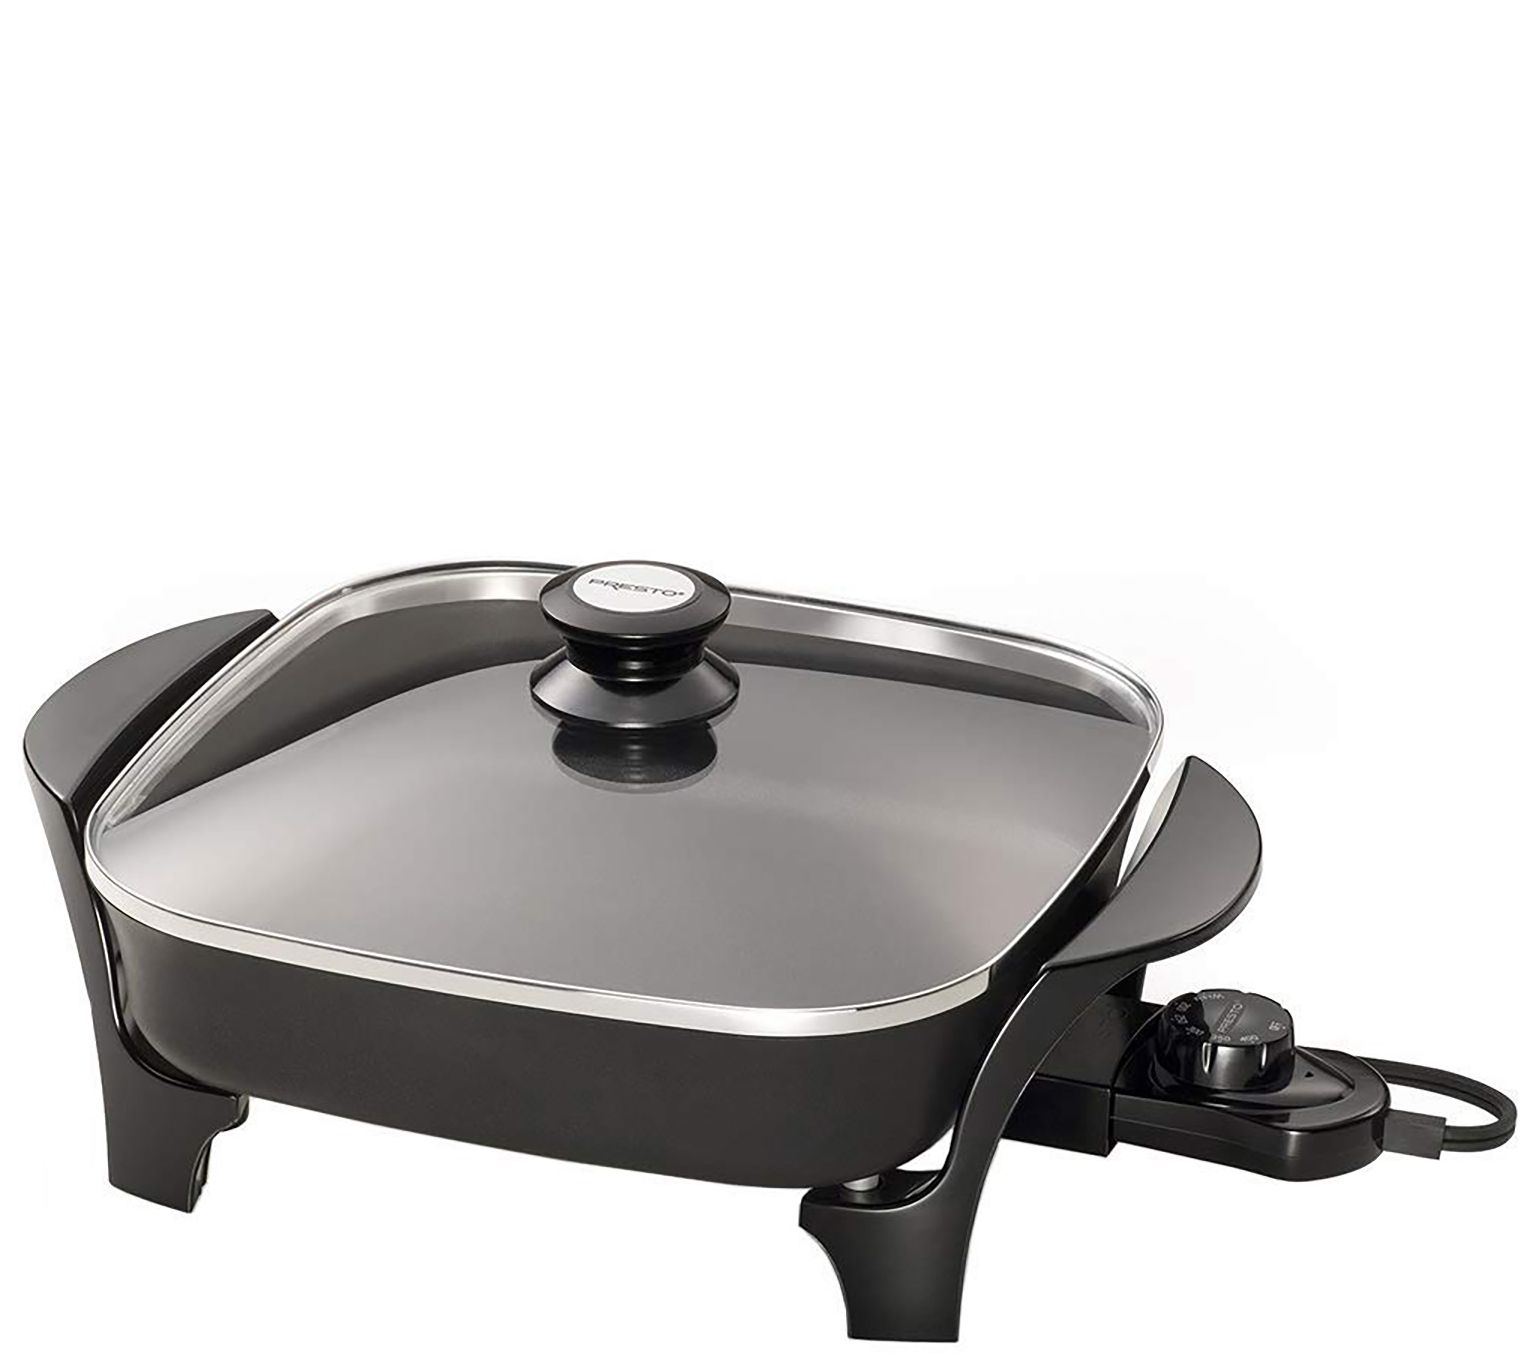 8 inch Electric Skillet